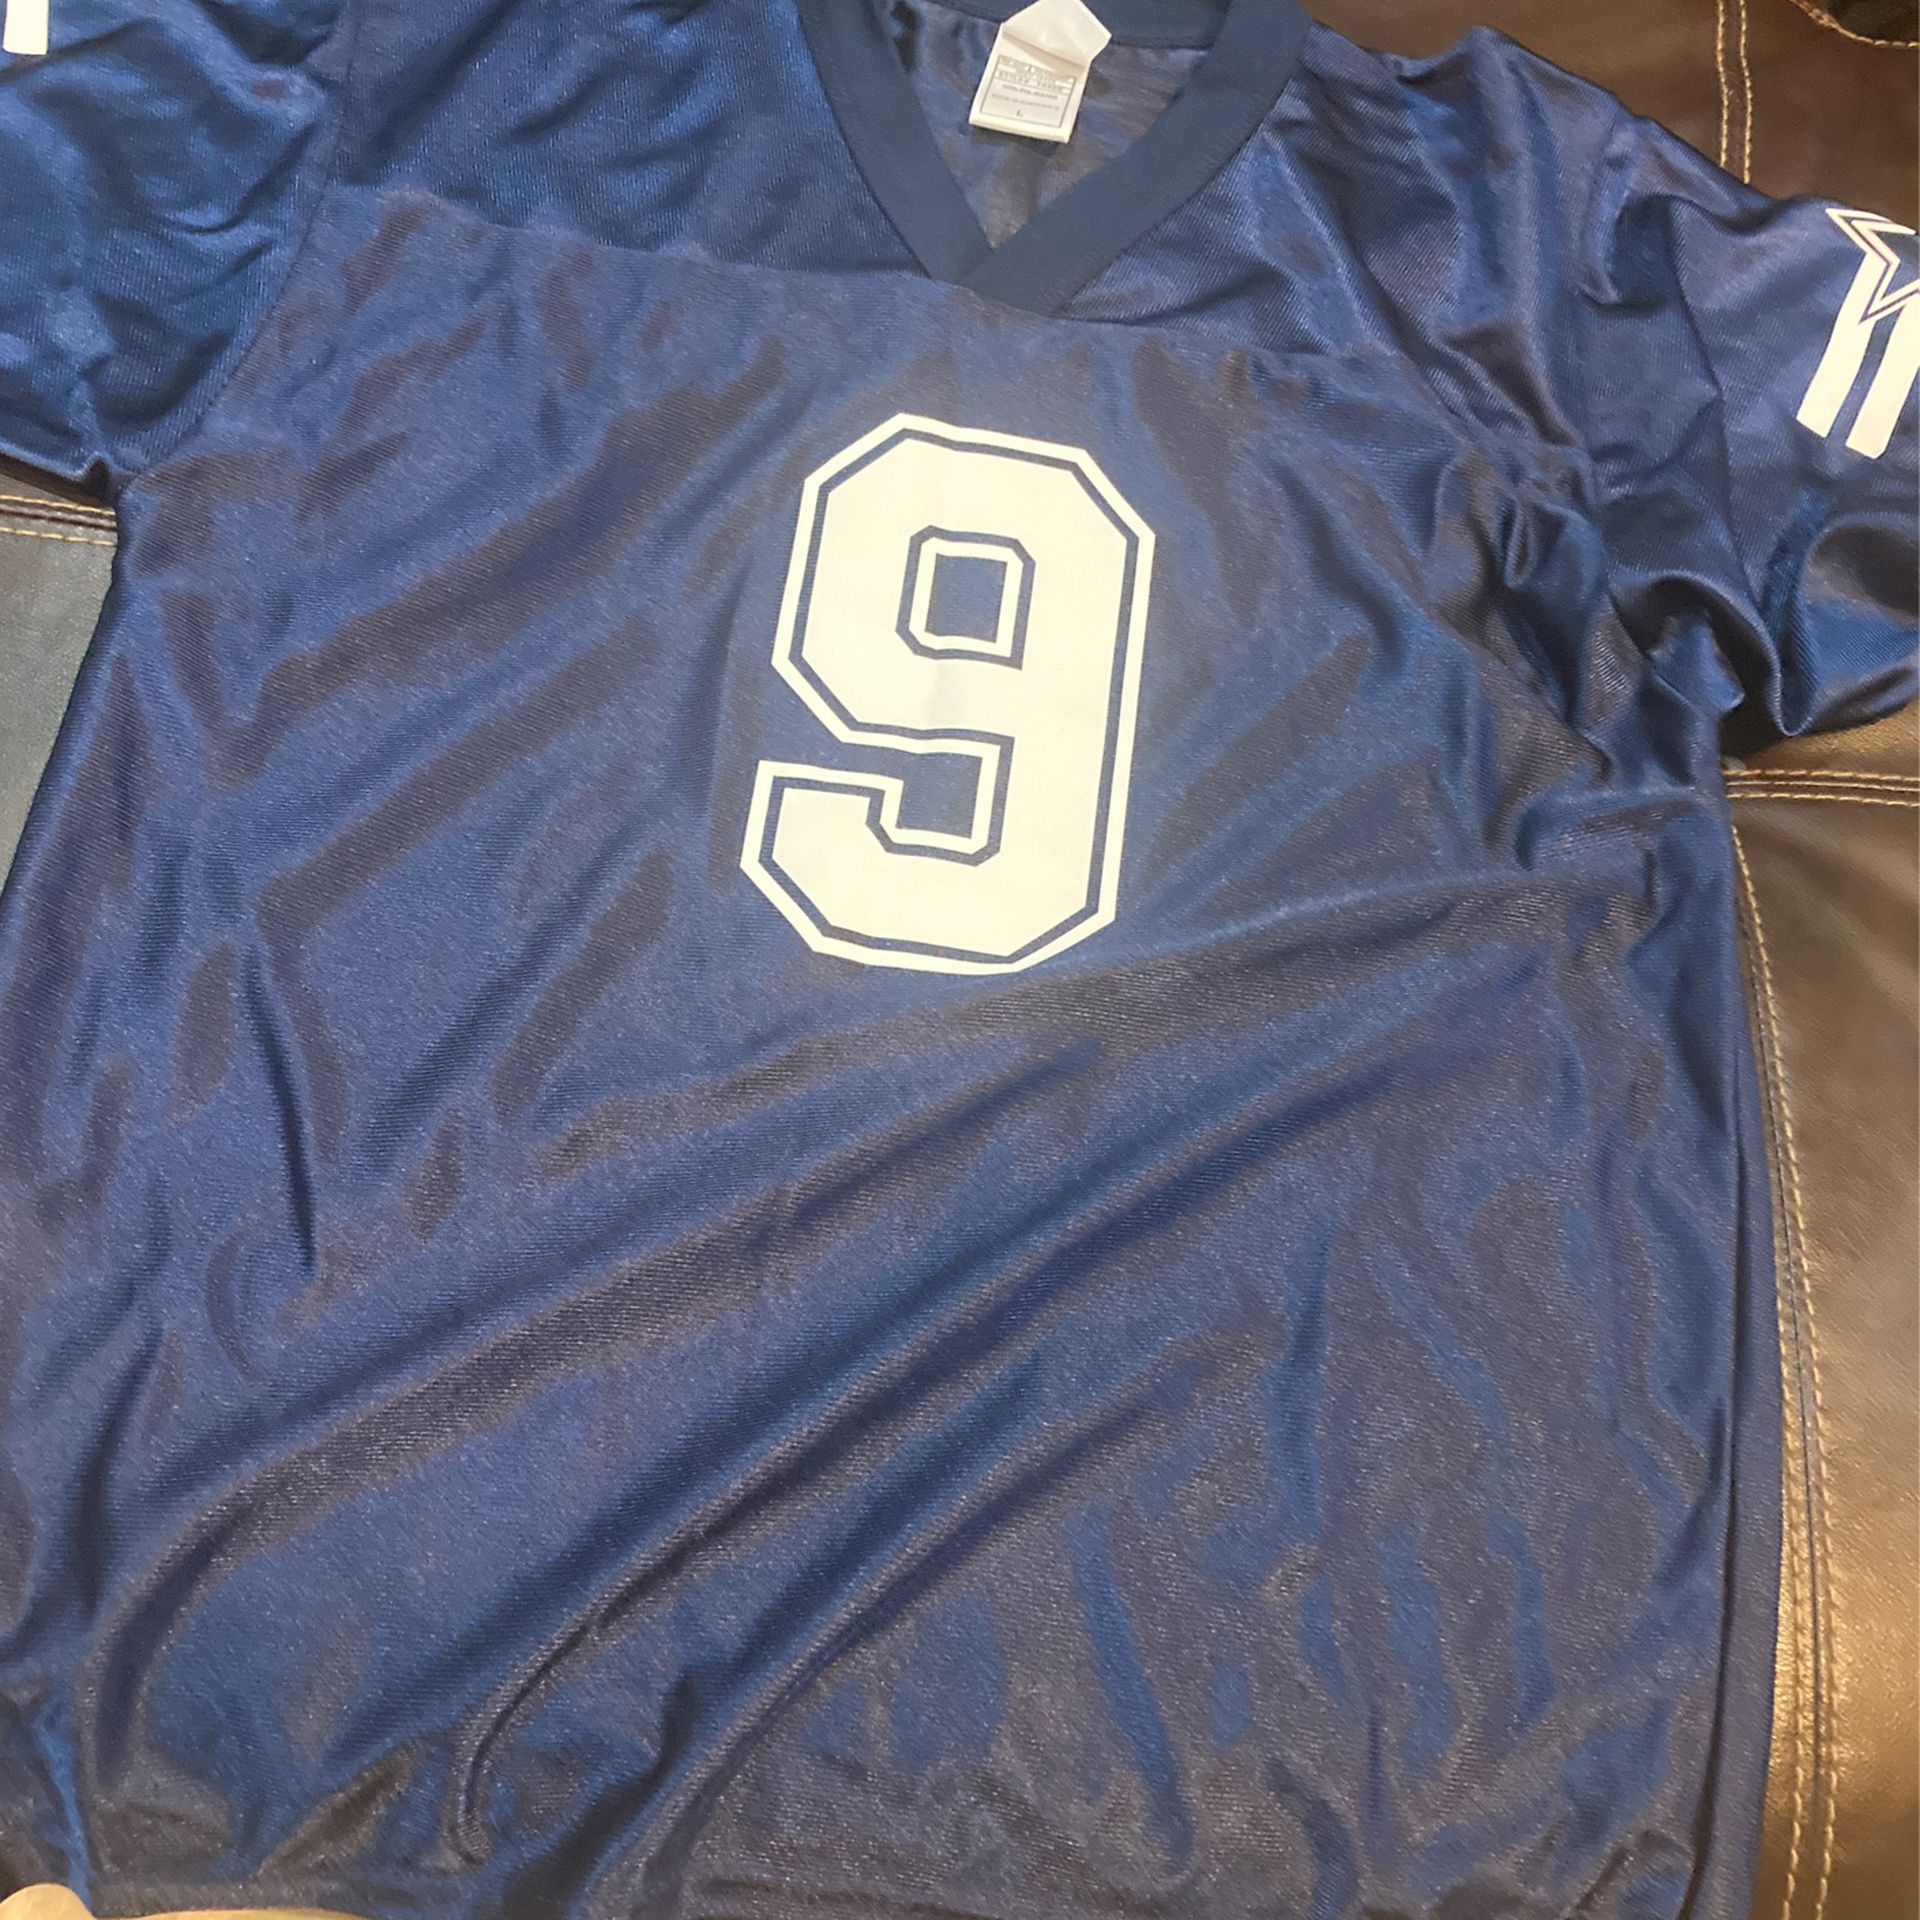 Youth Large Dallas Cowboys Jersey